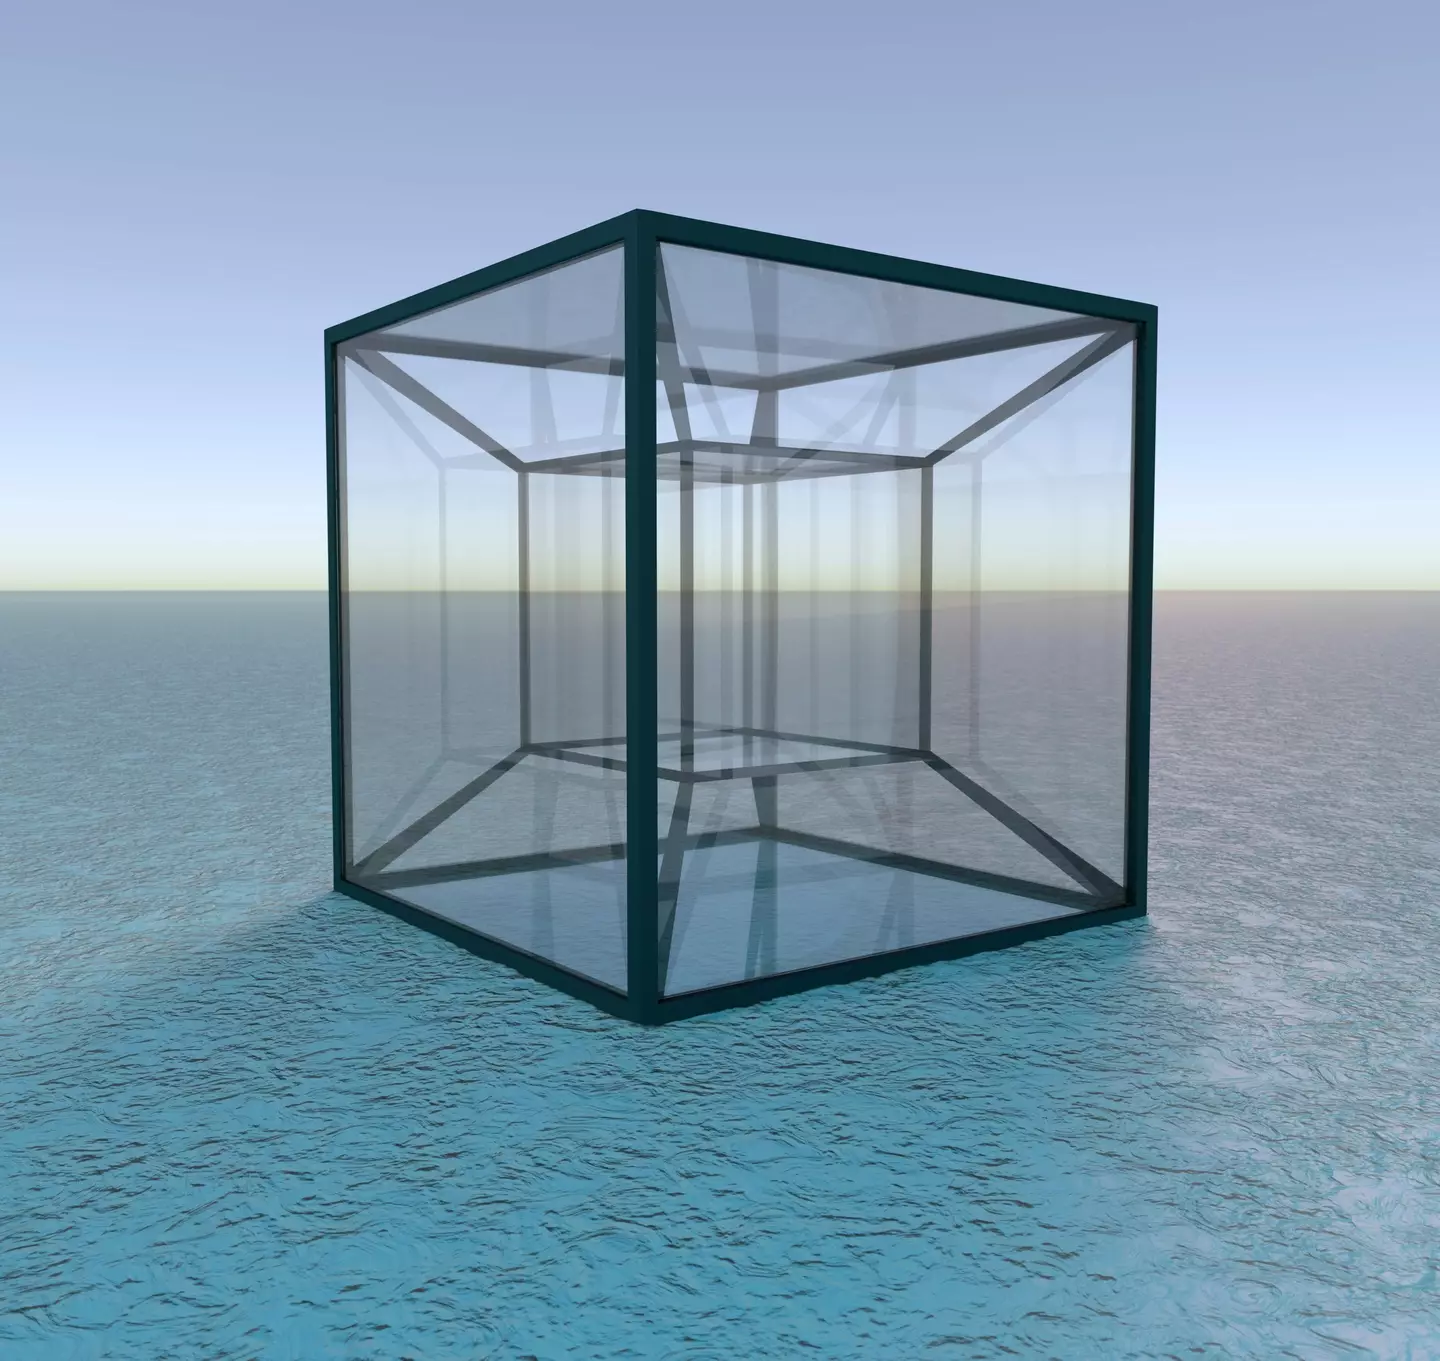 A tesseract is the four-dimensional analogue of the cube.